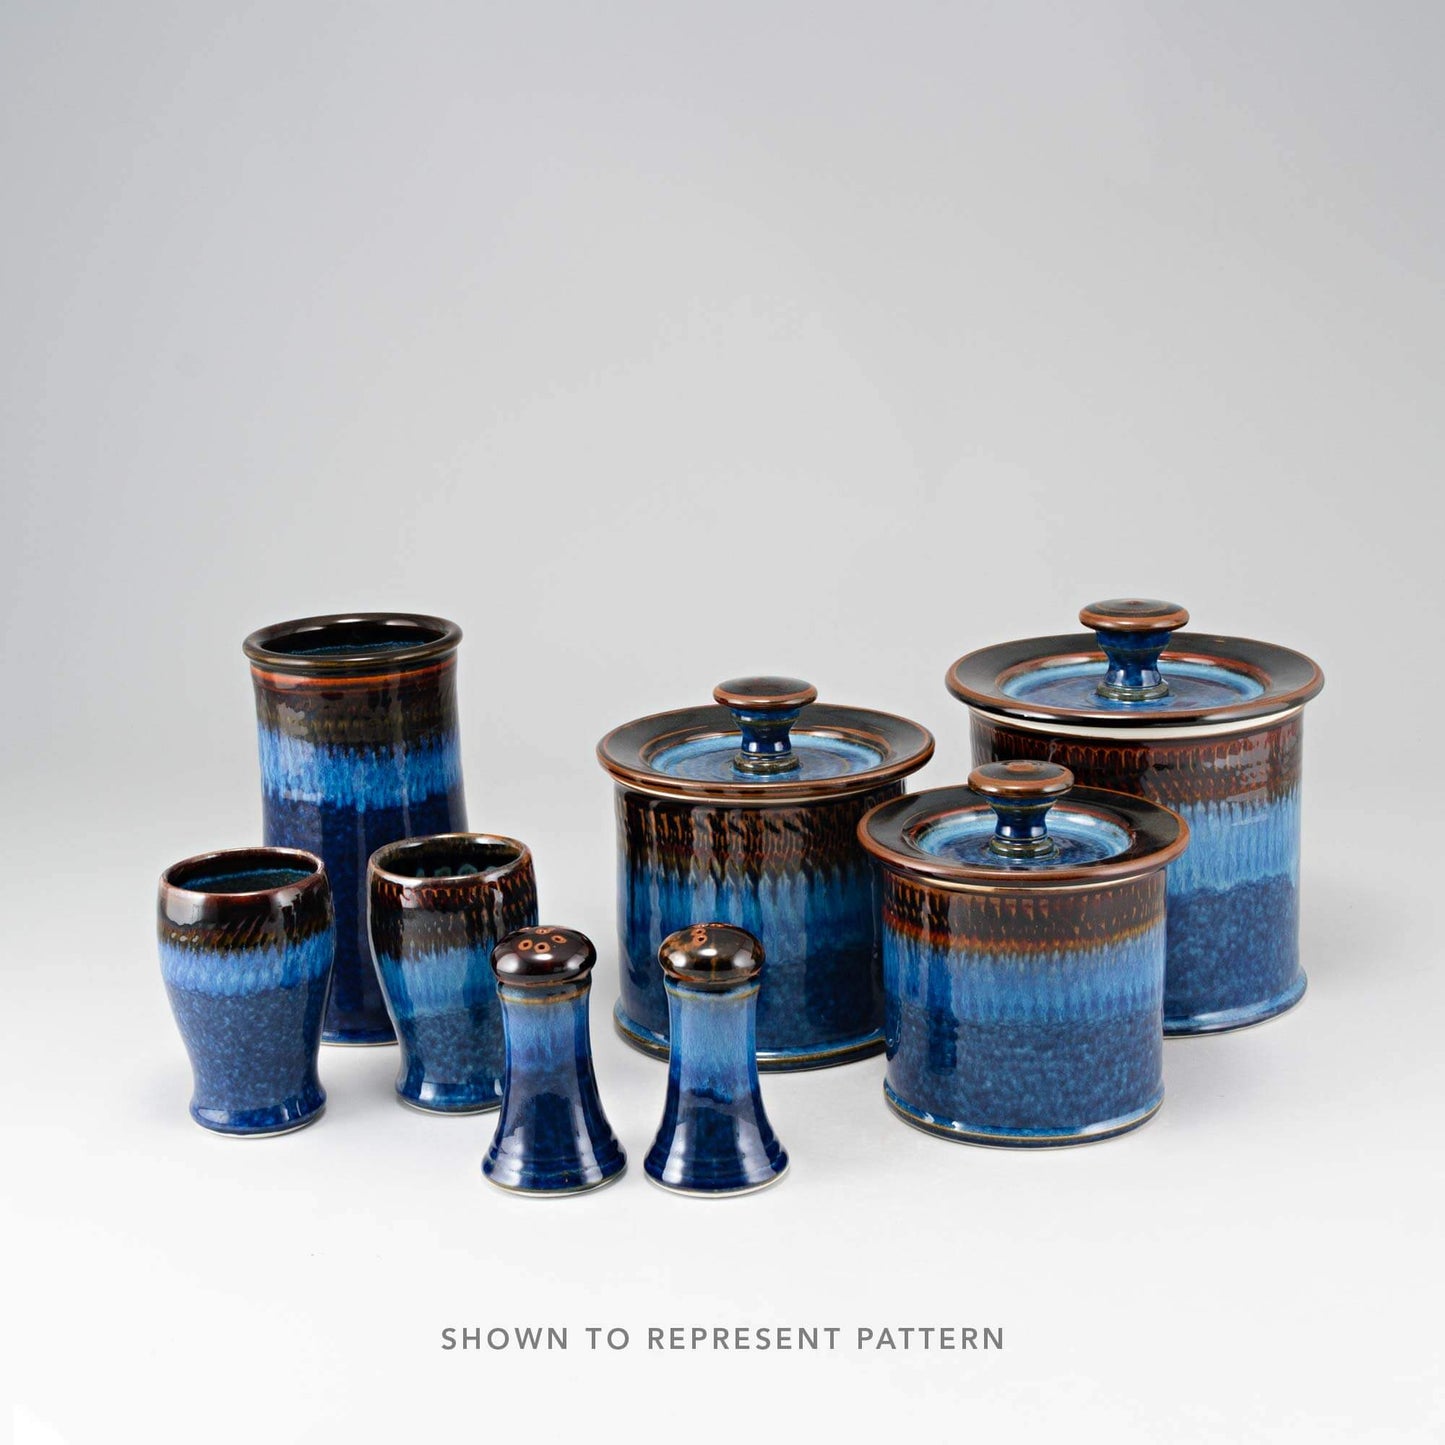 Handmade Pottery Salt & Pepper in Blue Hamada pattern made by Georgetown Pottery in Maine